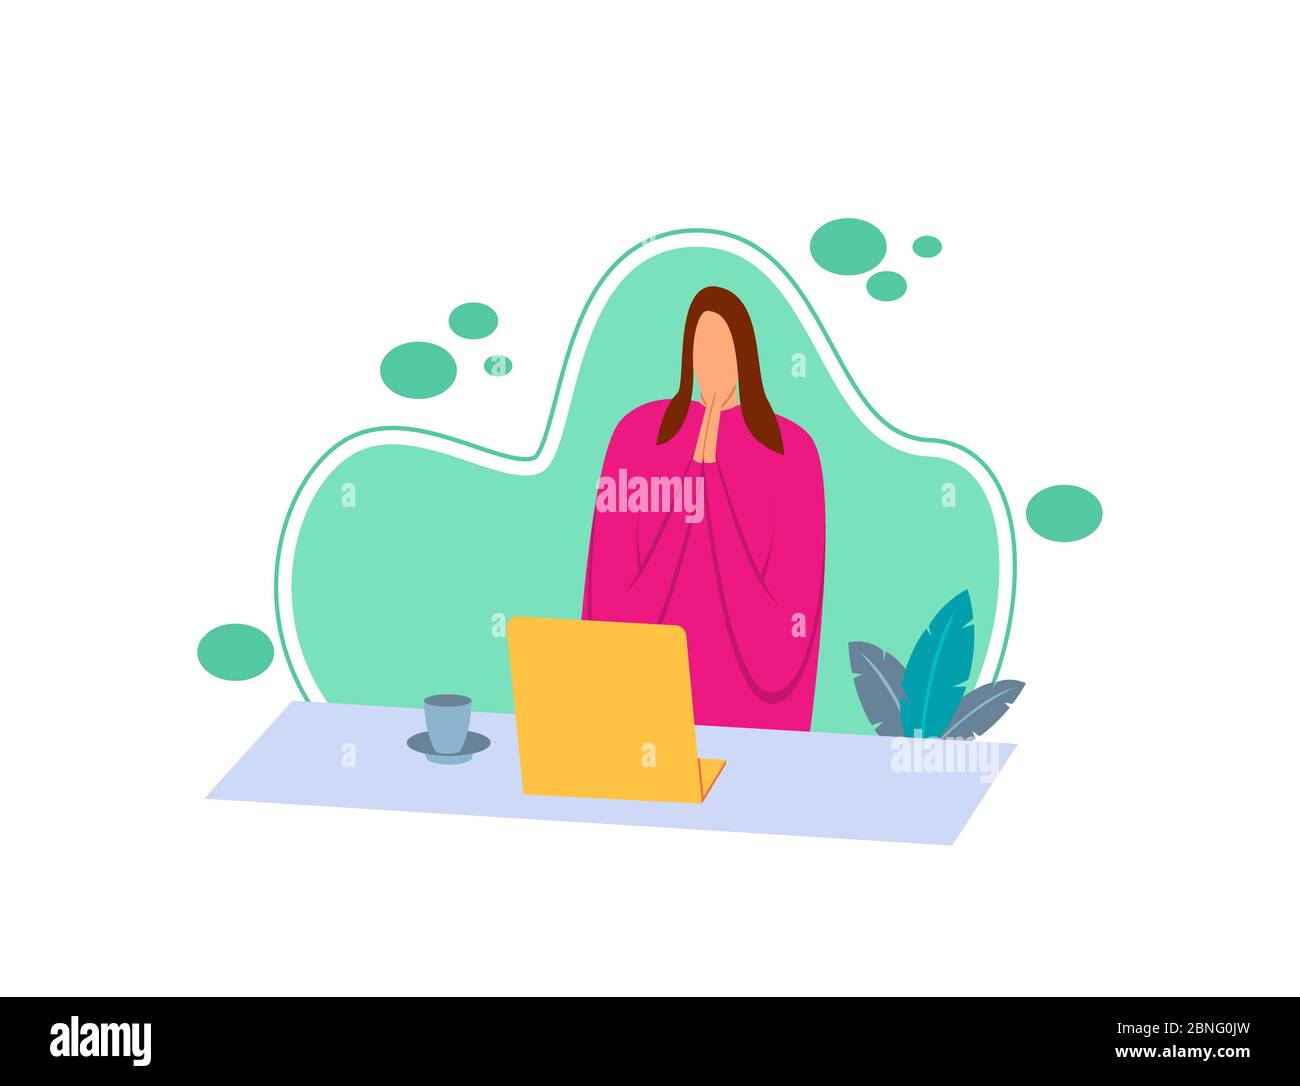 Flat illustration of a girl sitting reading the latest news using a netbook. Flat style cartoon character with the concept of people reading the news Stock Vector